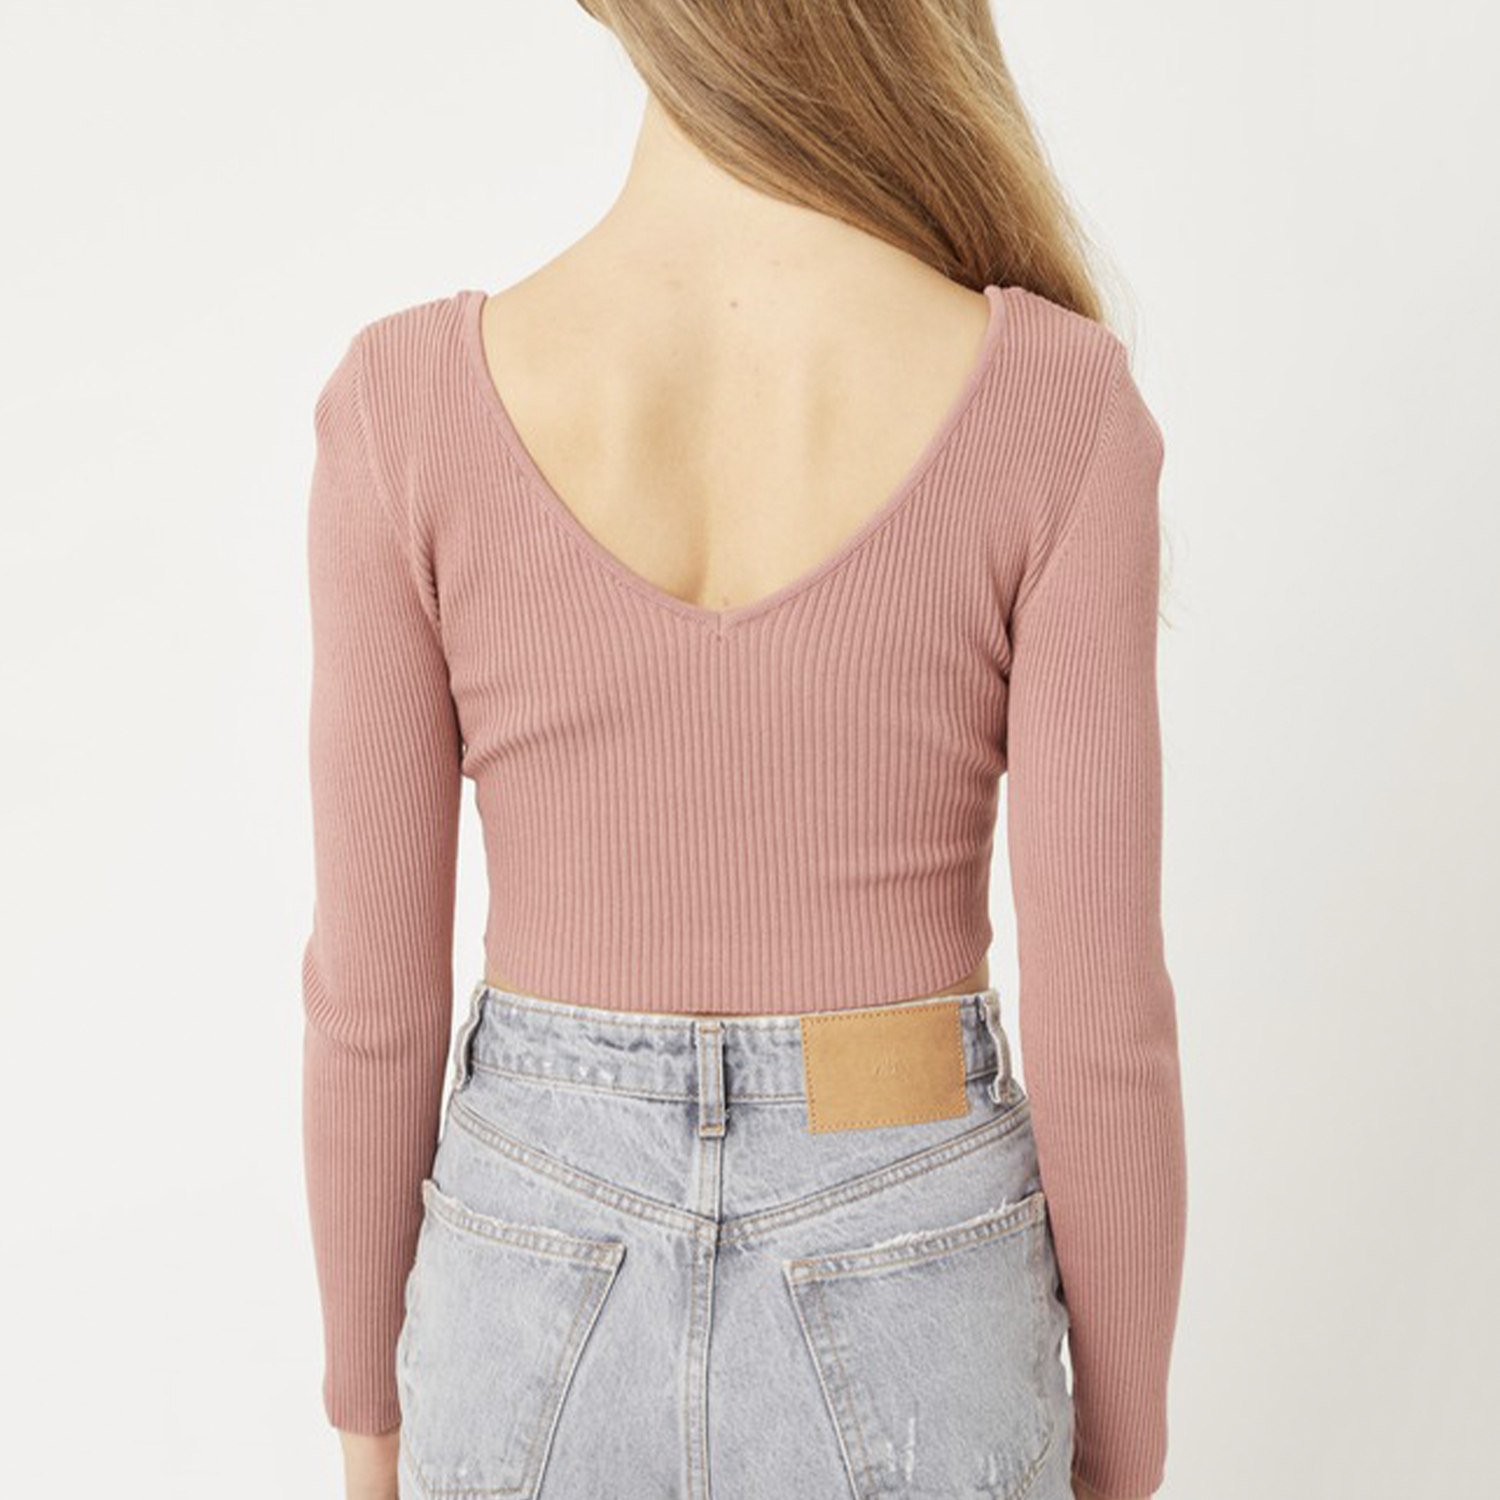 Moonbeam V Neck Long Sleeve Rib Crop Top. This top is perfect for dressing up or down. Featuring a ribbed material with a V neckline and long sleeves, what's not to love about it? A long sleeve top is sure to be a staple in your new season wardrobe and we are obsessing over this one